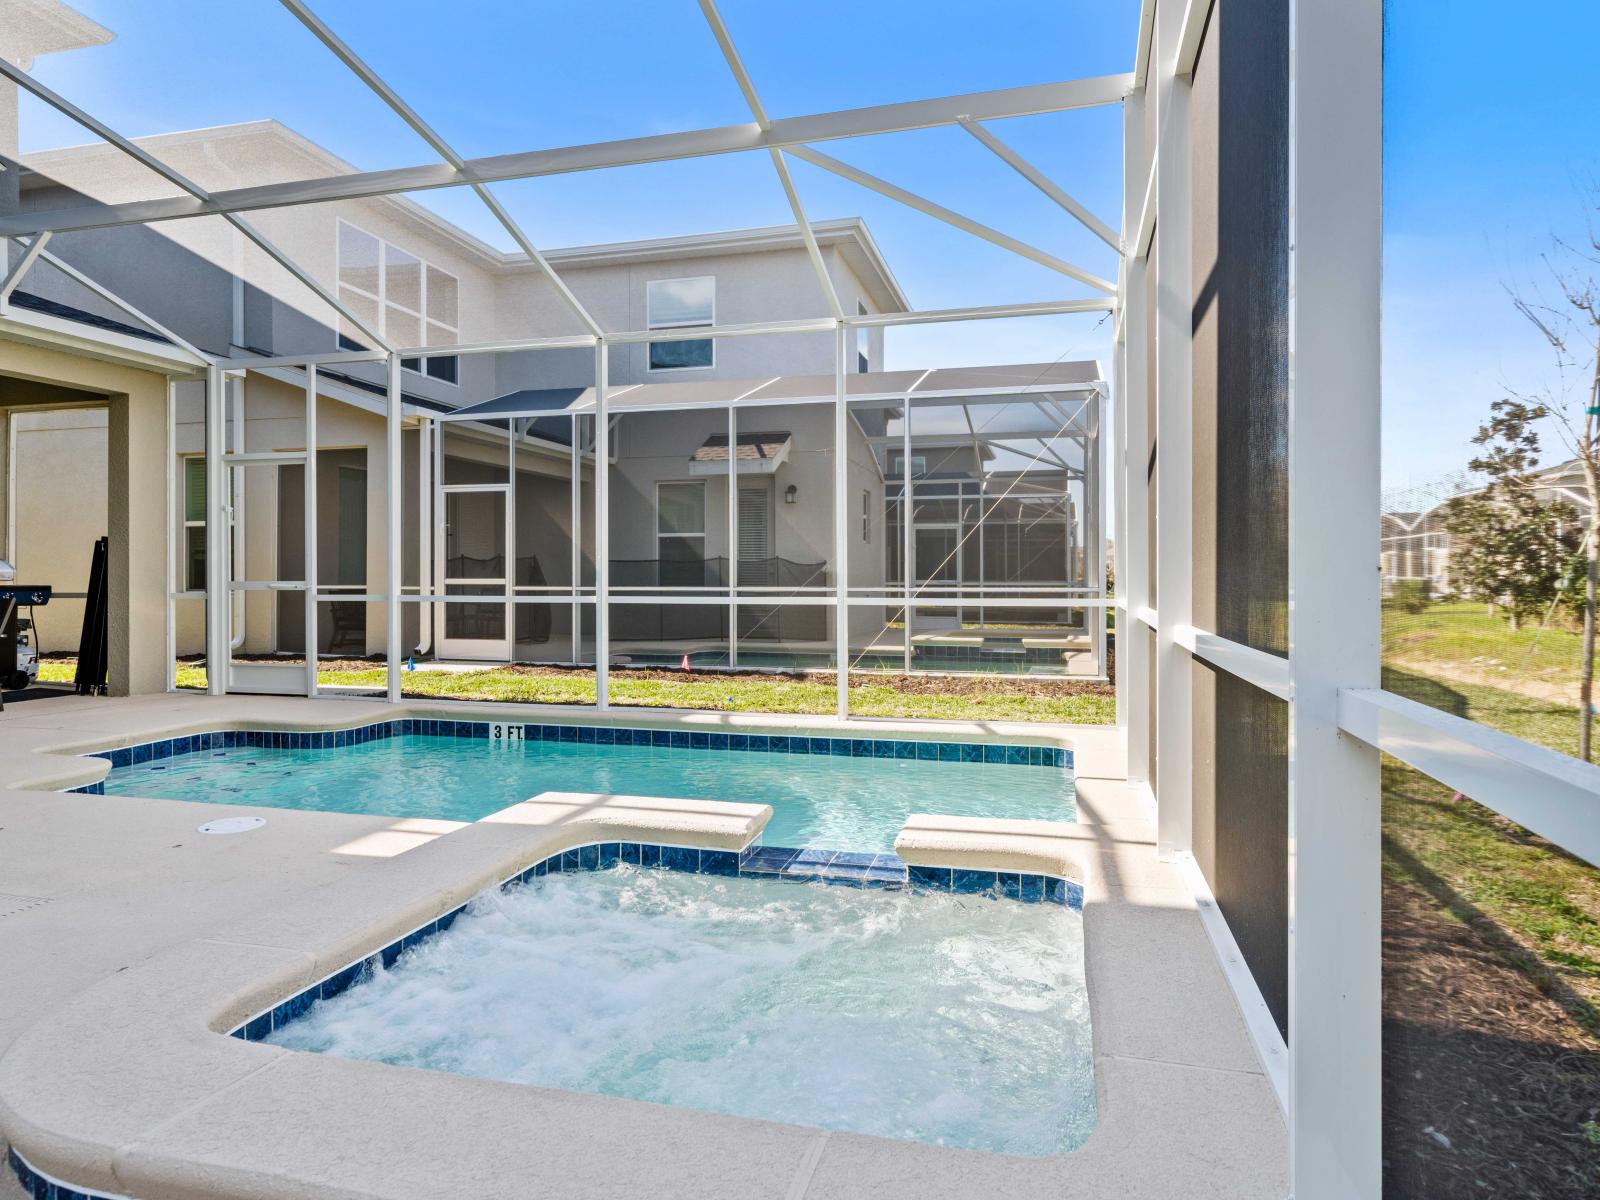 Lush Private Pool Area of the Home in Davenport Florida - Provides a relaxed atmosphere for unwinding - Space for swimming, games, and activities - Poolside dining perfect for enjoyment and relaxation